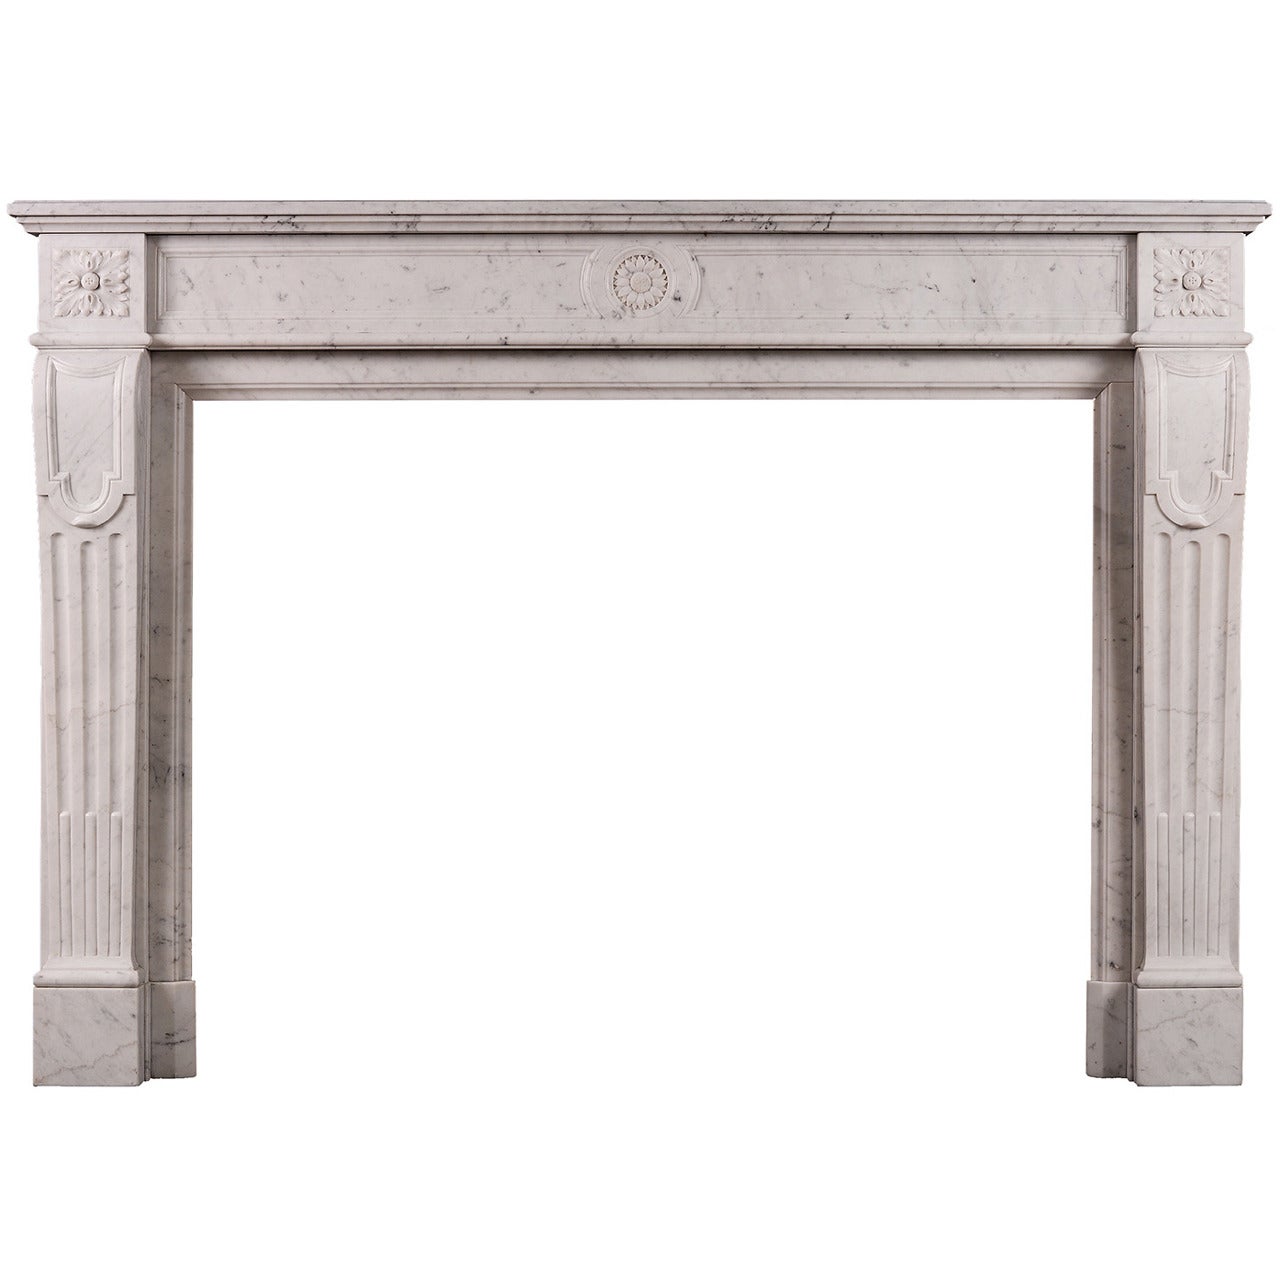 French Carrara Antique Marble Fireplace Mantel, 19th Century For Sale